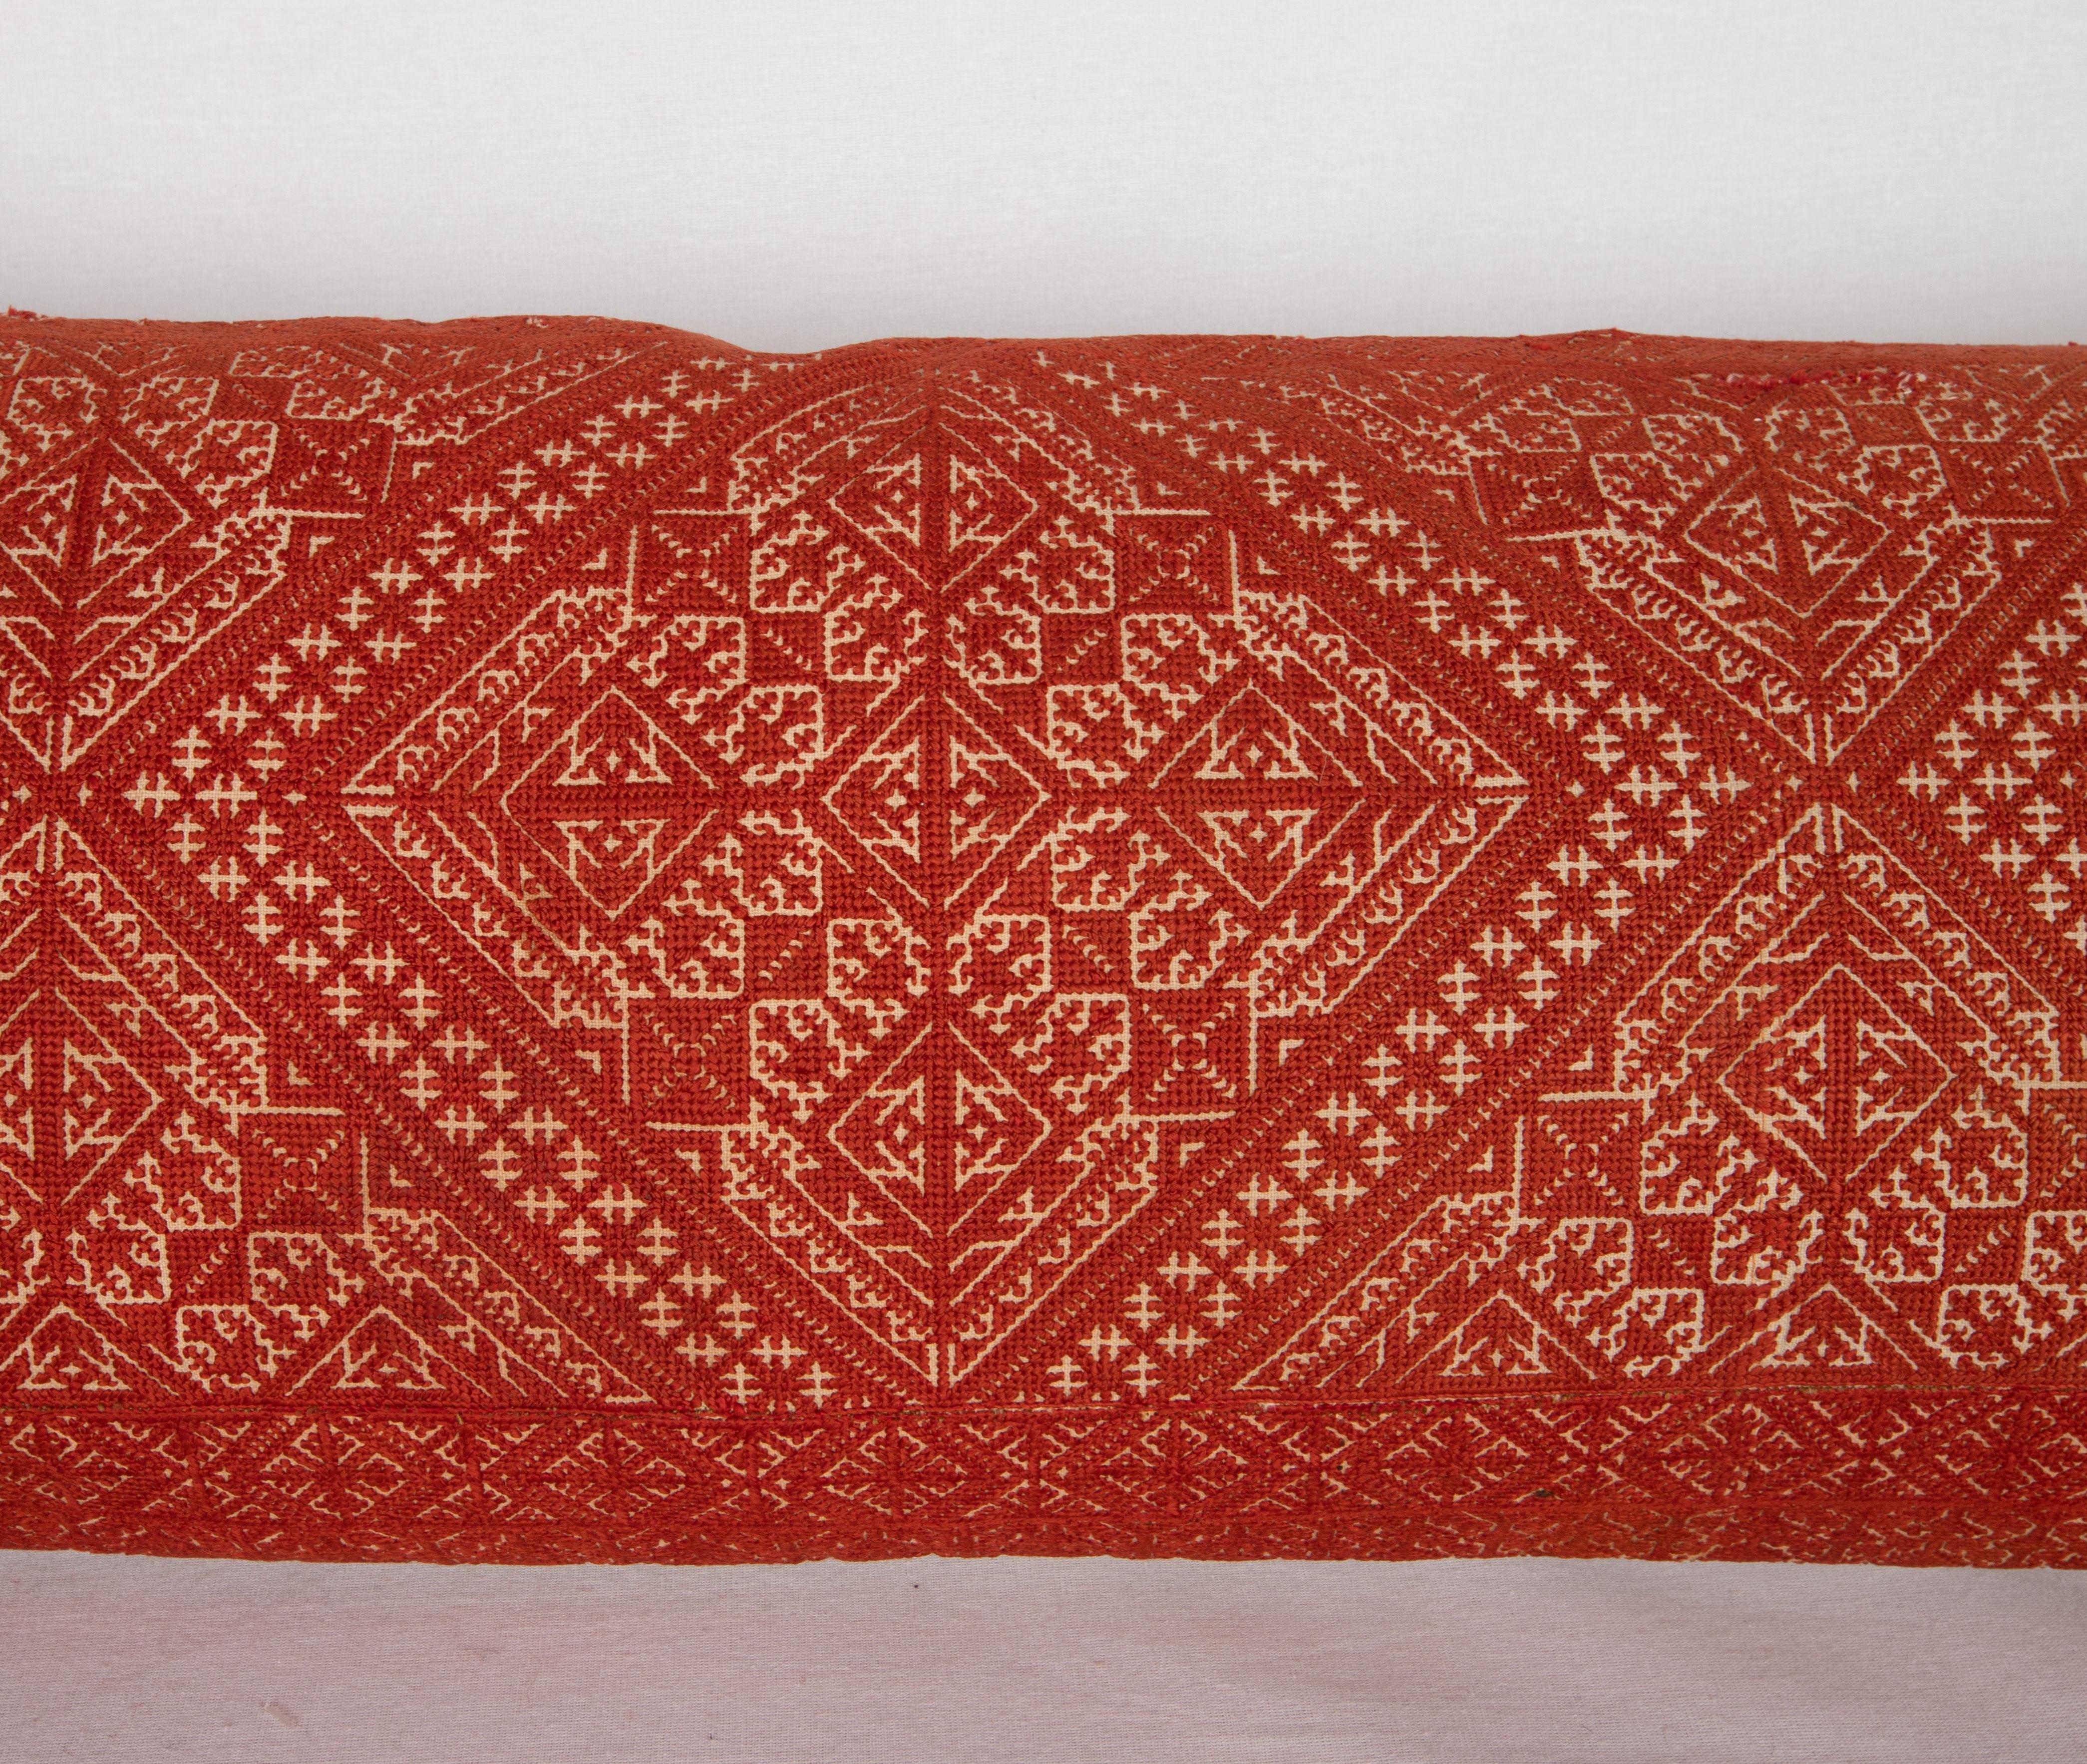 Embroidered Antique Fez Lumbar Pillow Case, Morocco Early 20th C.